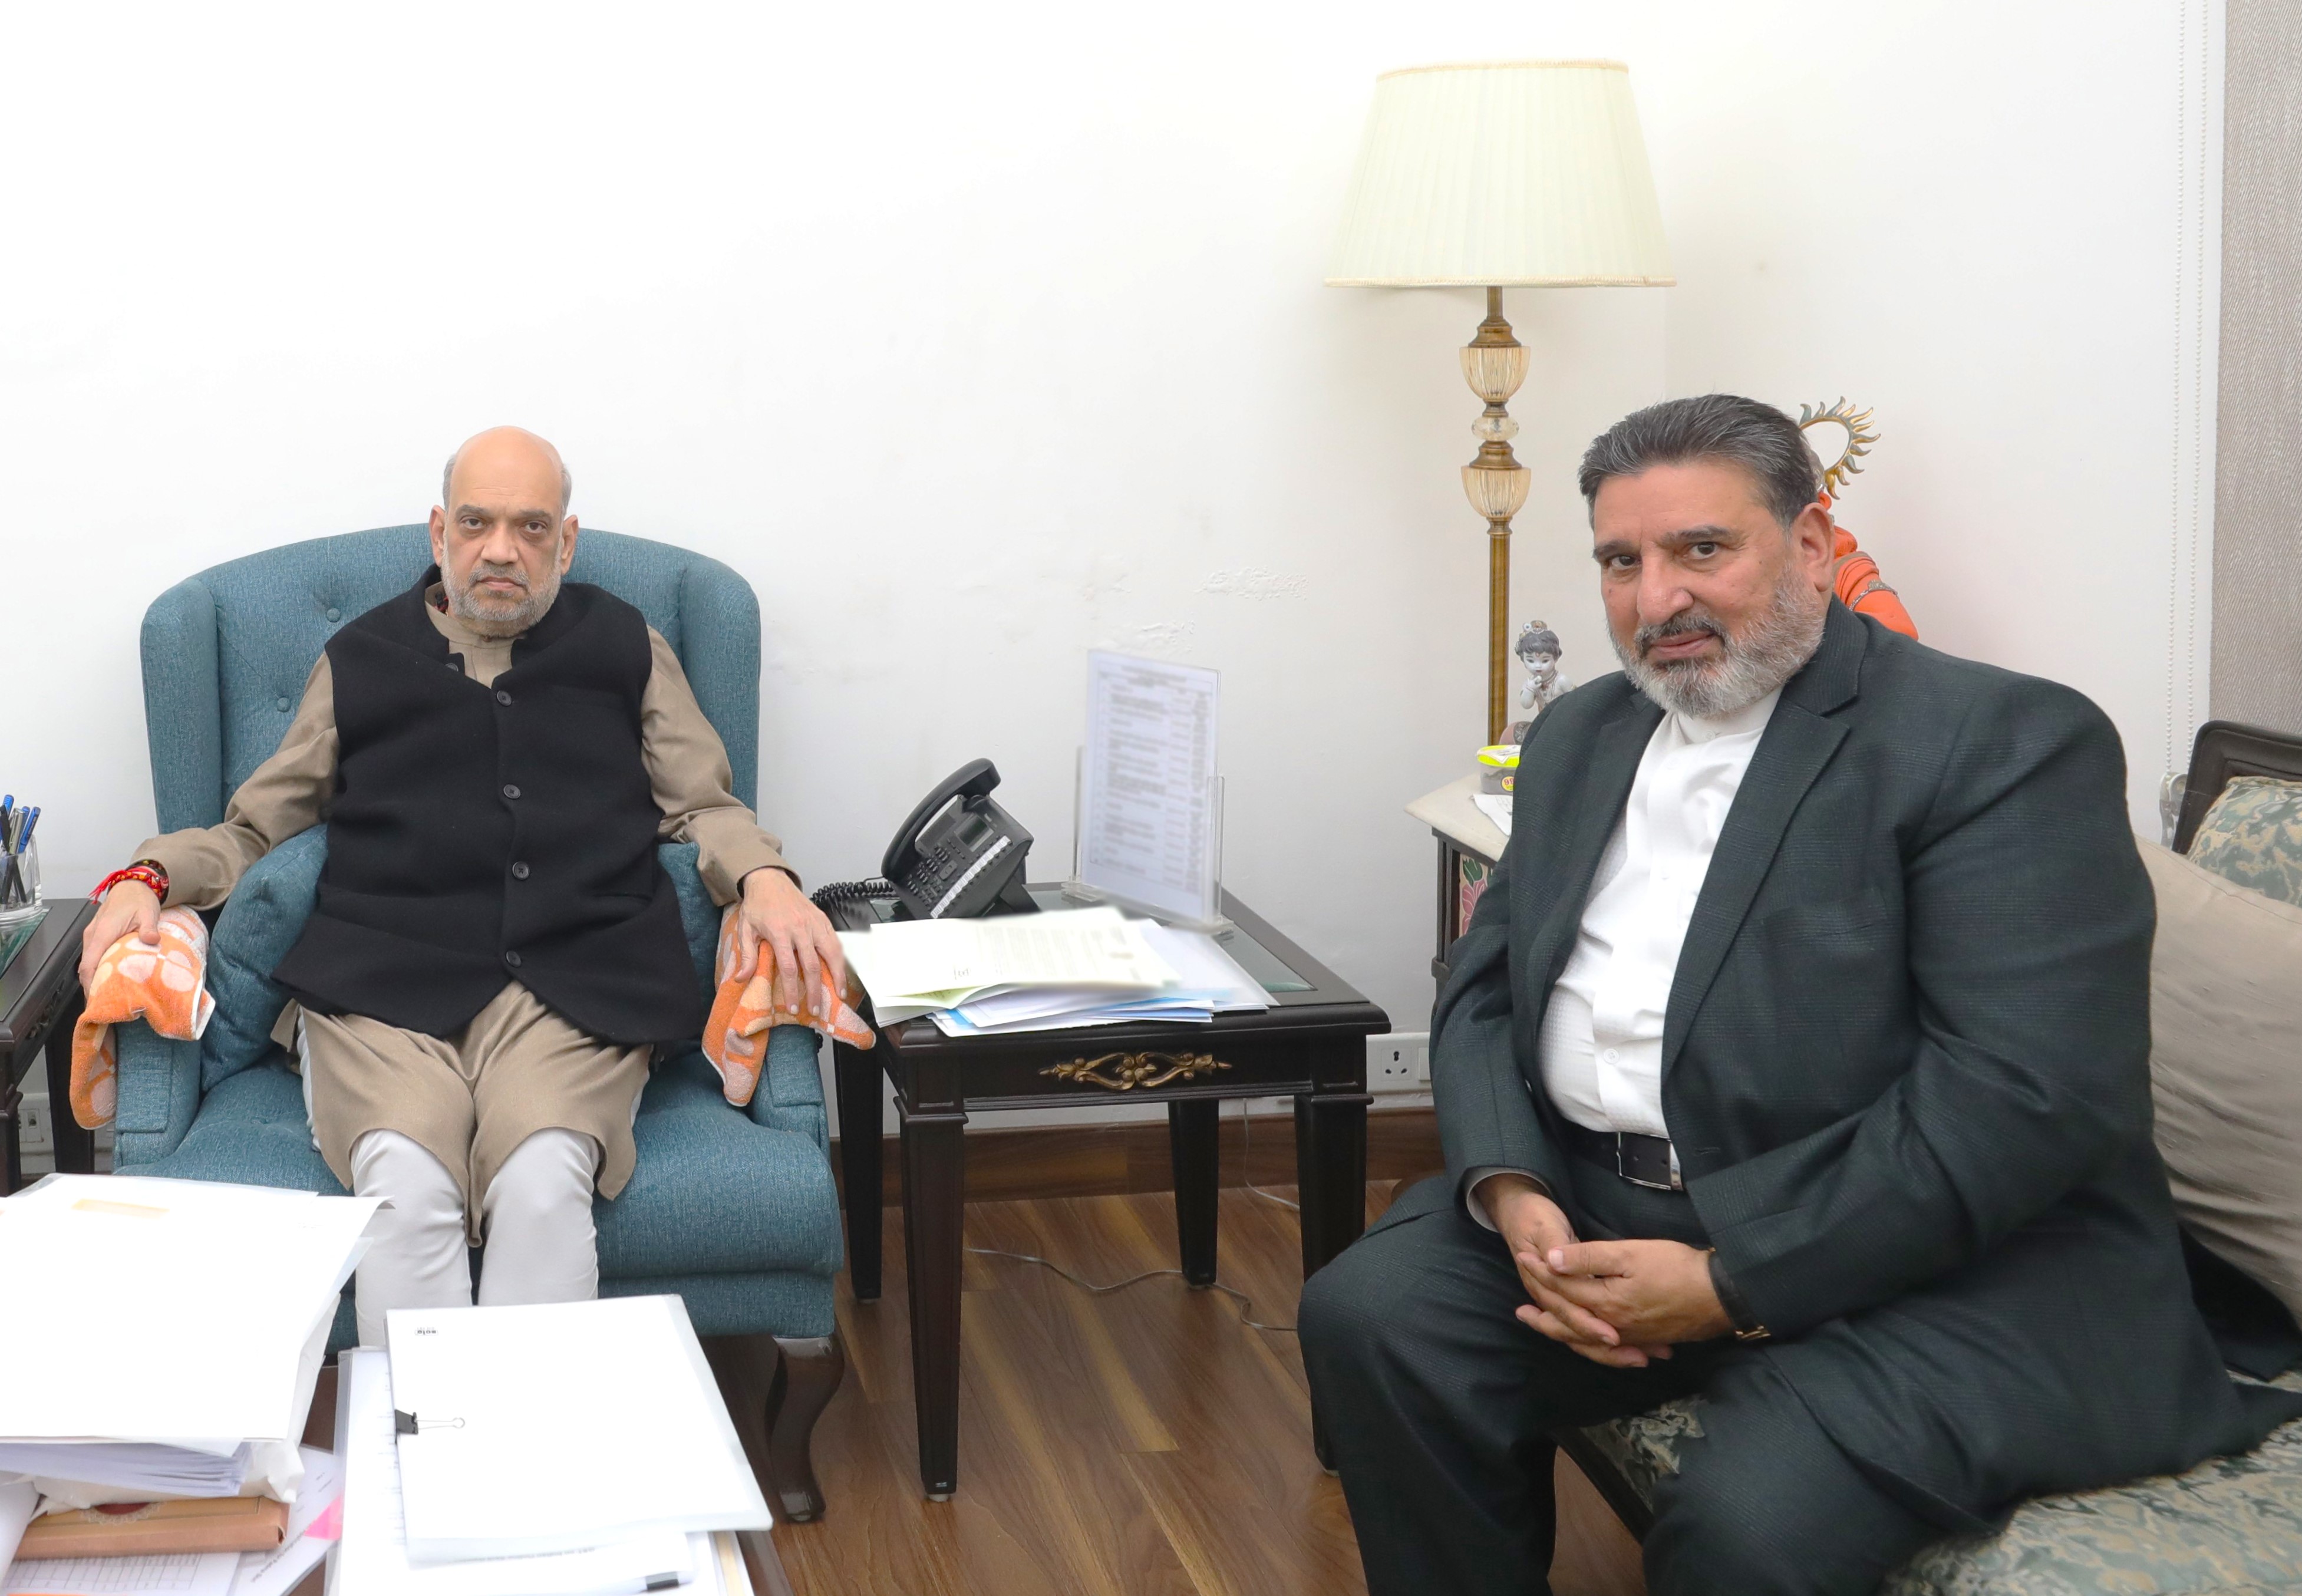 Syed Mohammad Altaf Bukhari calls on Home Minister, expresses anguish over the recent civilian deaths in Poonch, seeks severe punishment for those involved  Home Minister assures Apni Party President that no civilian deaths will be tolerated in dealing with militancy  Mr. Bukhari demands additional electricity supply to address pressing needs in J&K